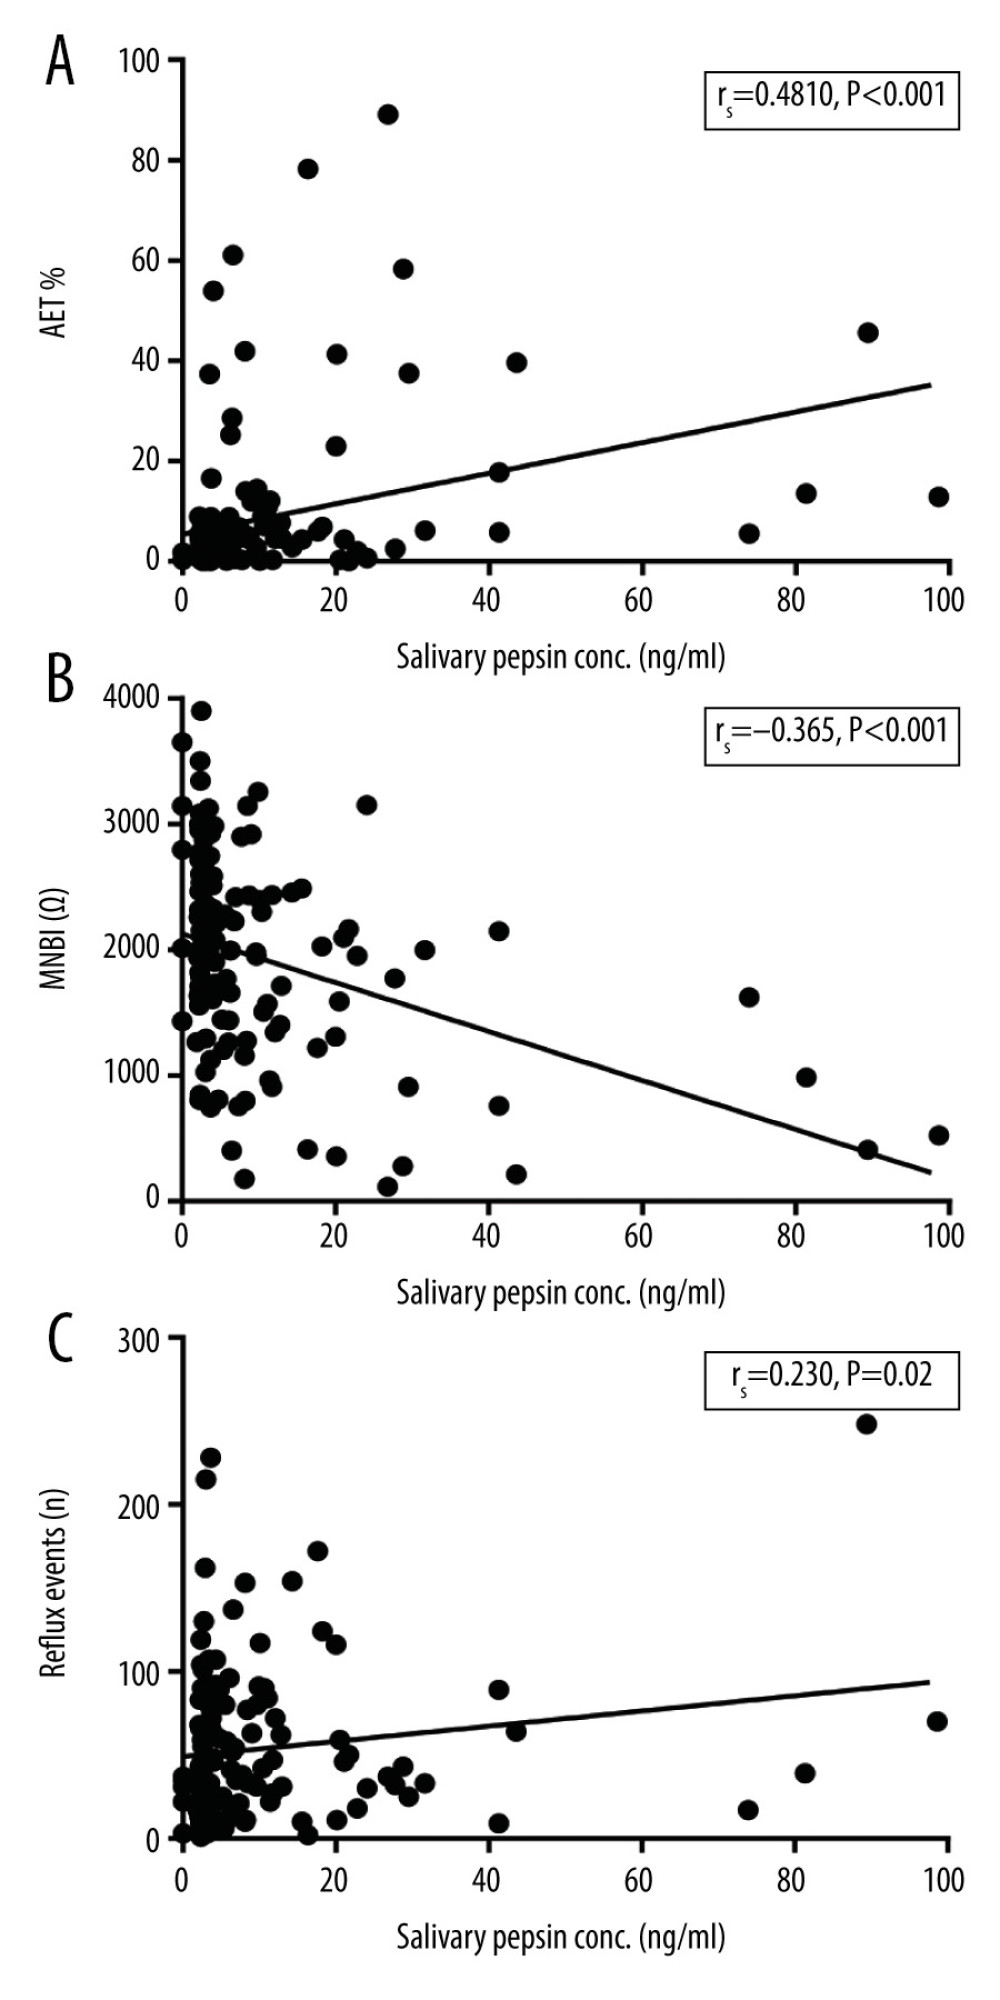 Correlation analyses between salivary pepsin concentration and (A) acid exposure time (AET); (B) mean nocturnal baseline impedance (MNBI); and (C) total reflux events.